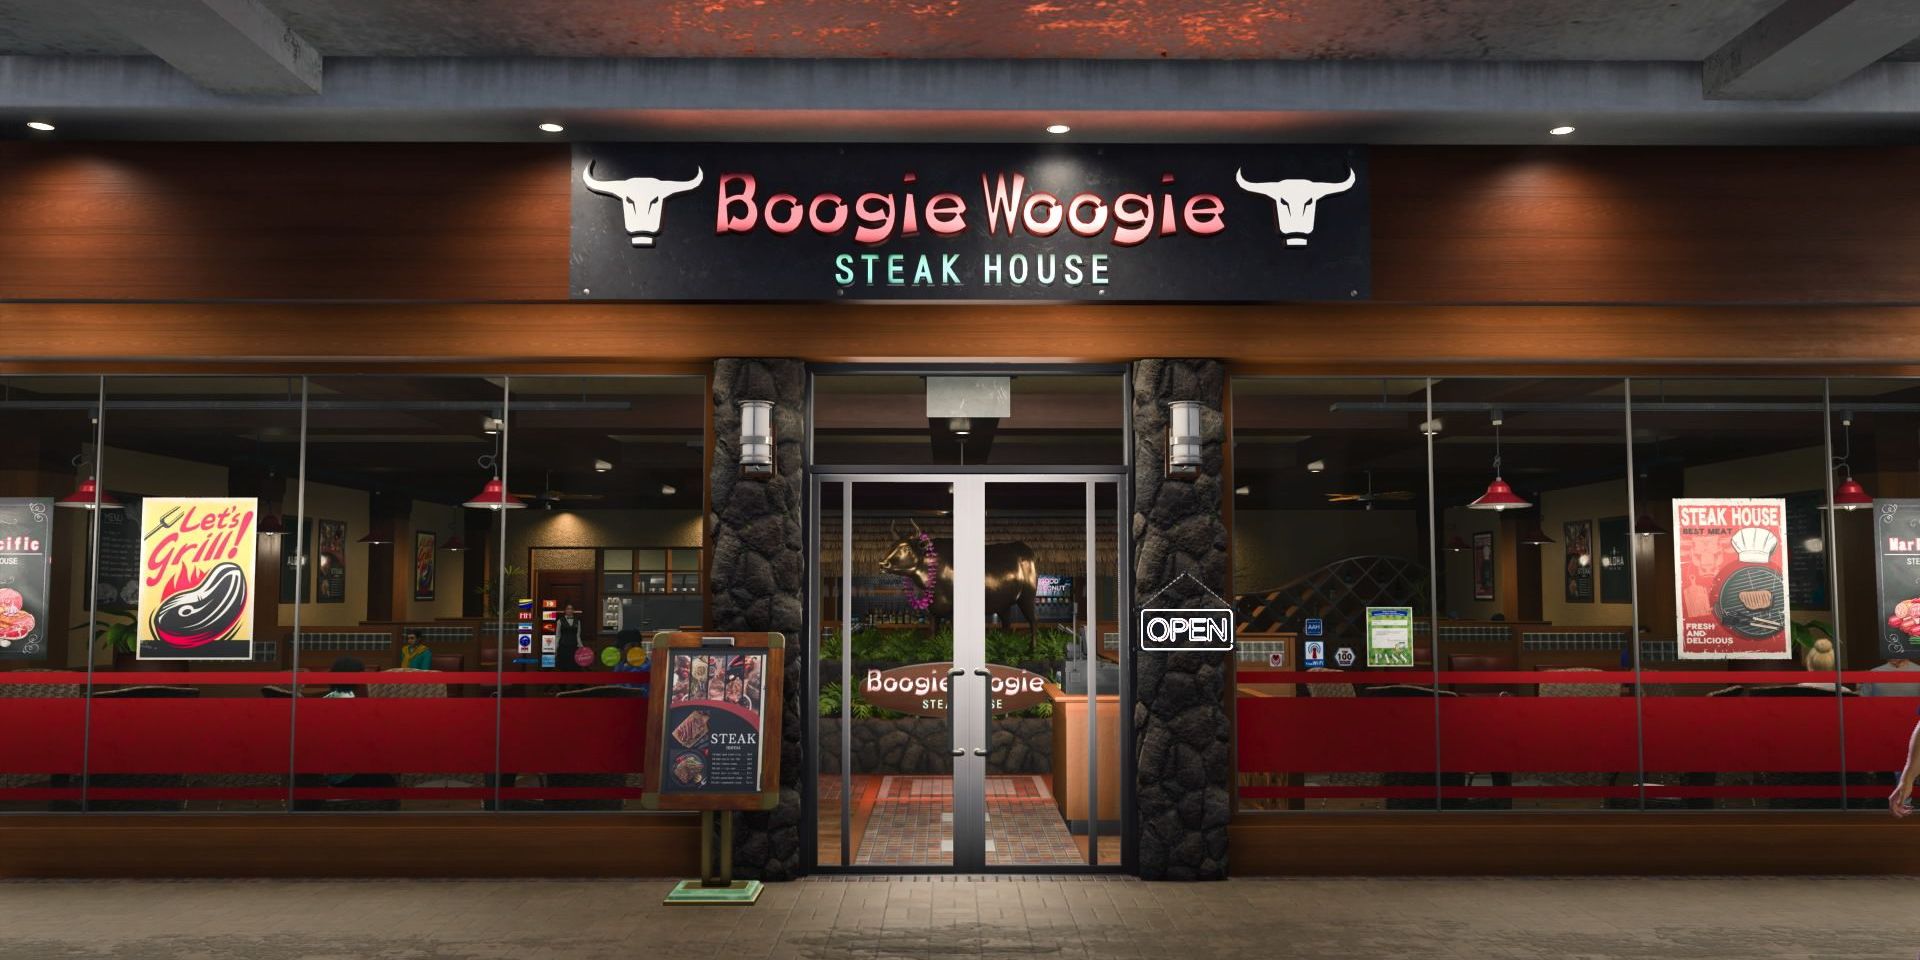 The storefront of Boogie Woogie Steak House in Infinite Wealth. It's a wood-paneled building with large windows, and a sign depicting two bull's heads.